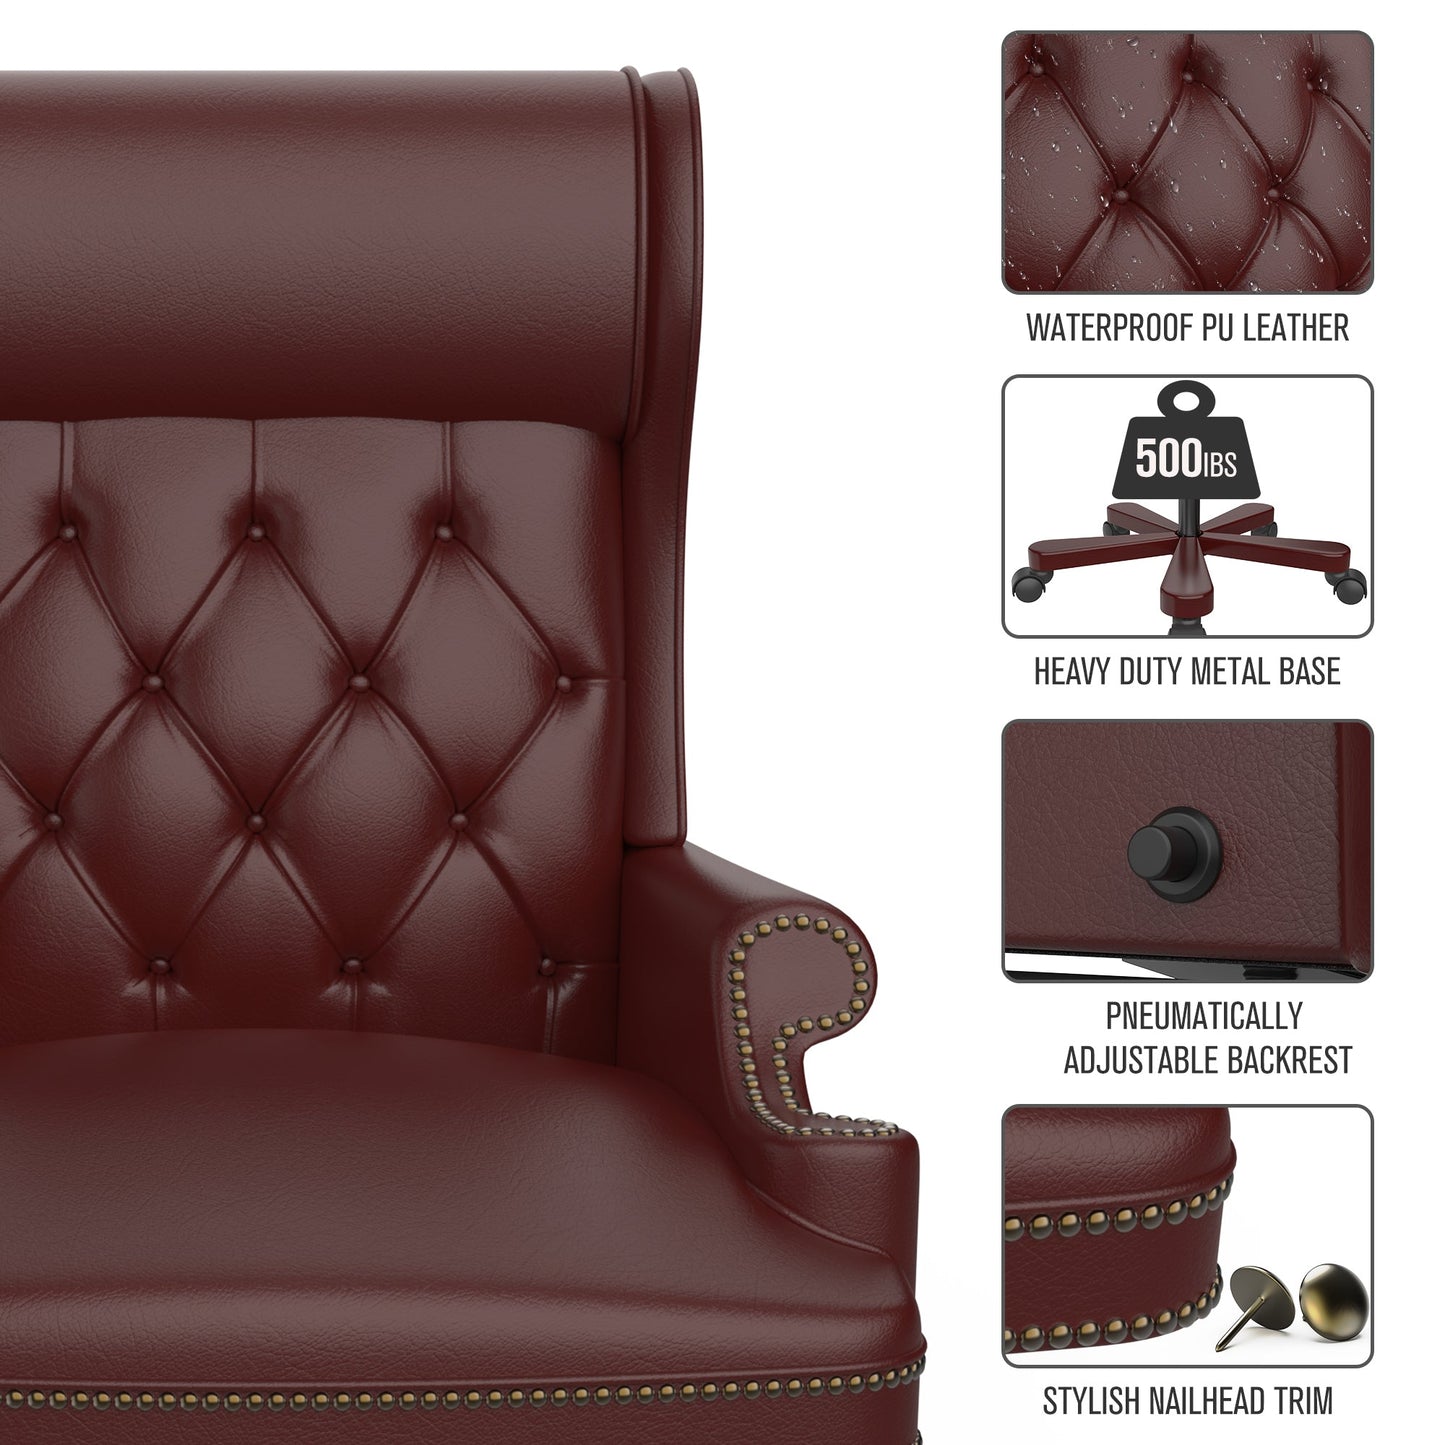 330LBS Executive Office Chair with Footstool, Ergonomic Design High Back Reclining Comfortable Desk Chair -  
Burgundy